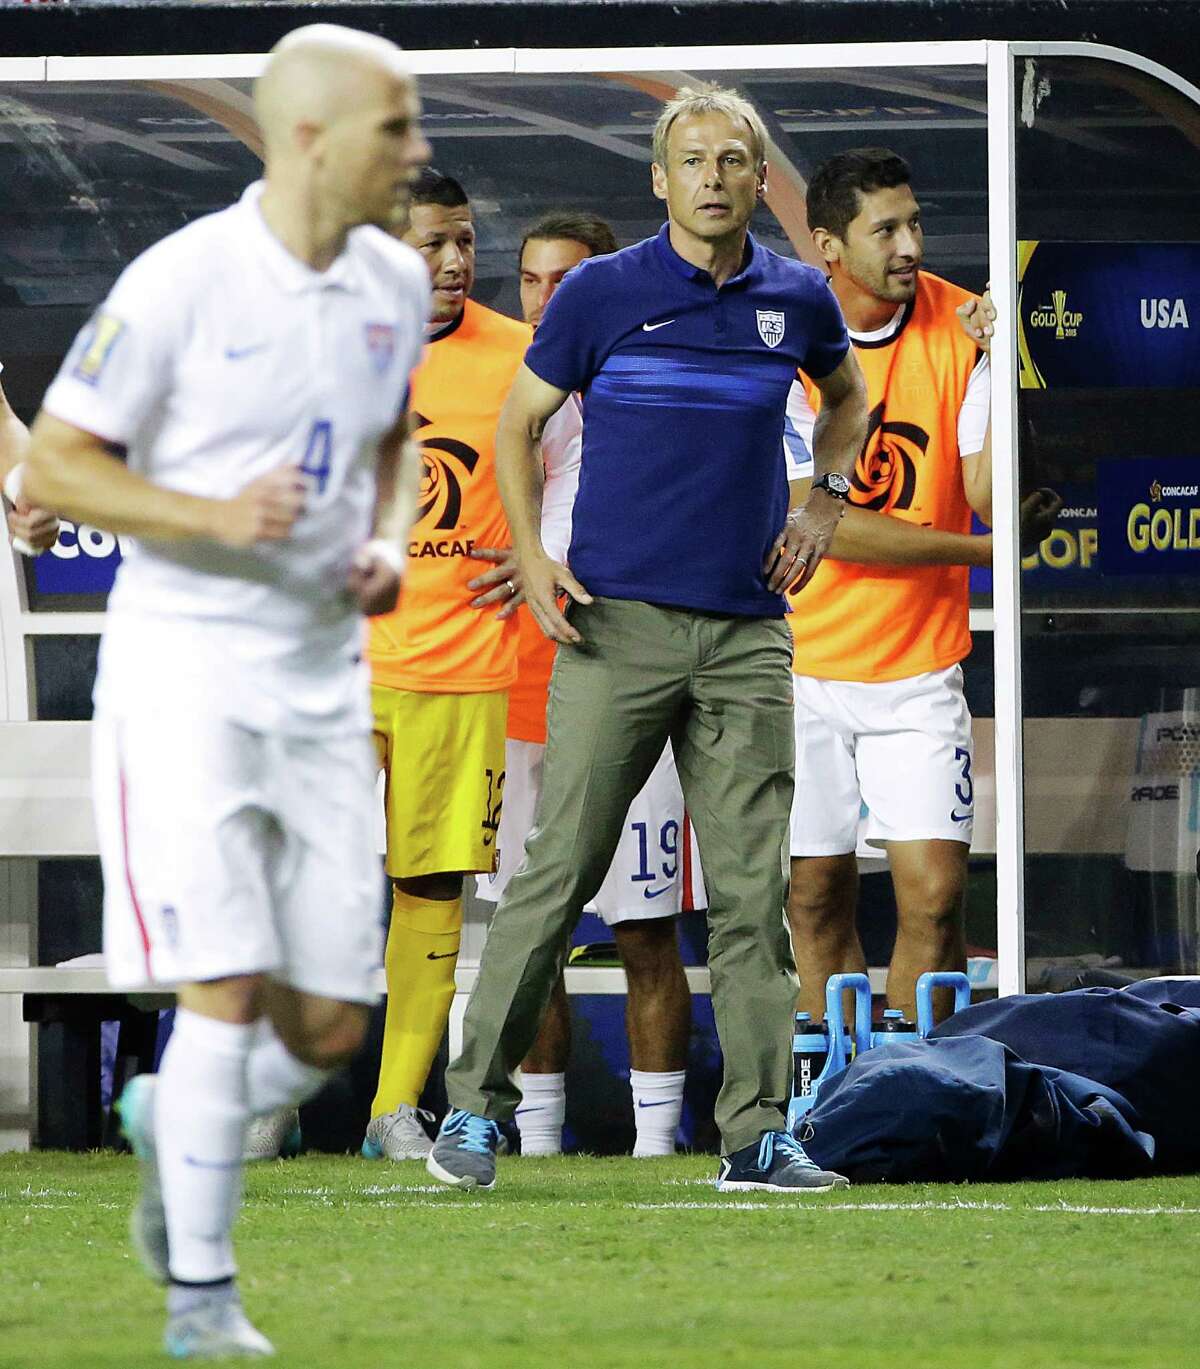 United States soccer coach Jurgen Klinsmann is ready to move on after watching his team stumble and lose to Jamaica in the Gold Cup semifinals Wednesday.